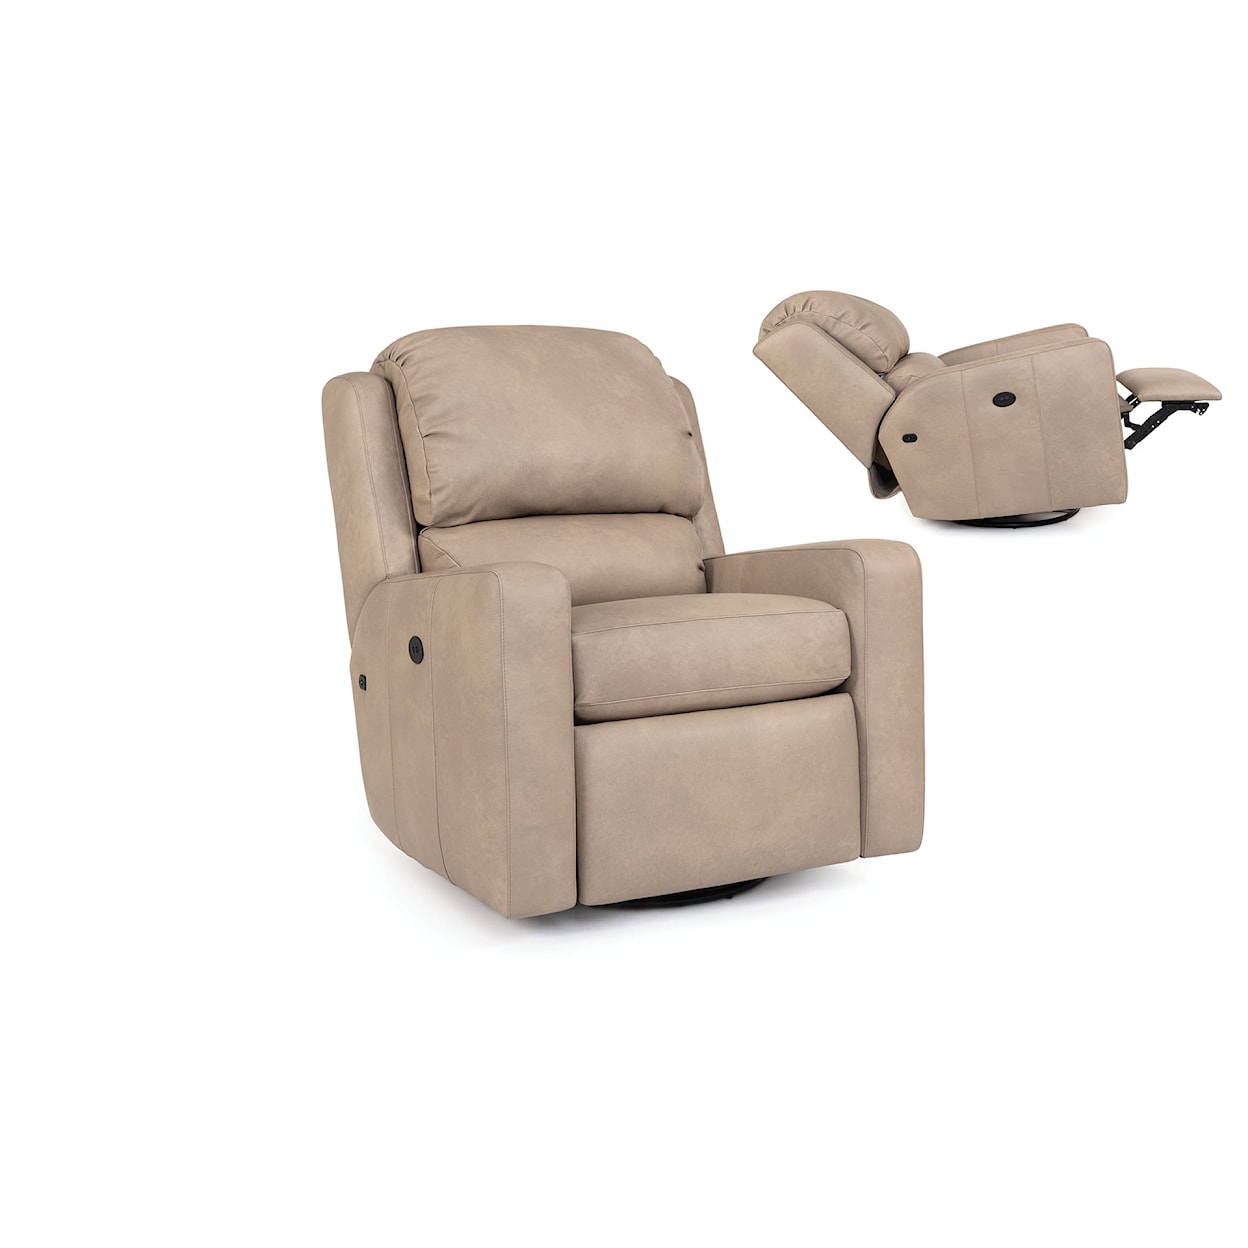 Smith Brothers 781 Motorized Swivel Glider Recliner